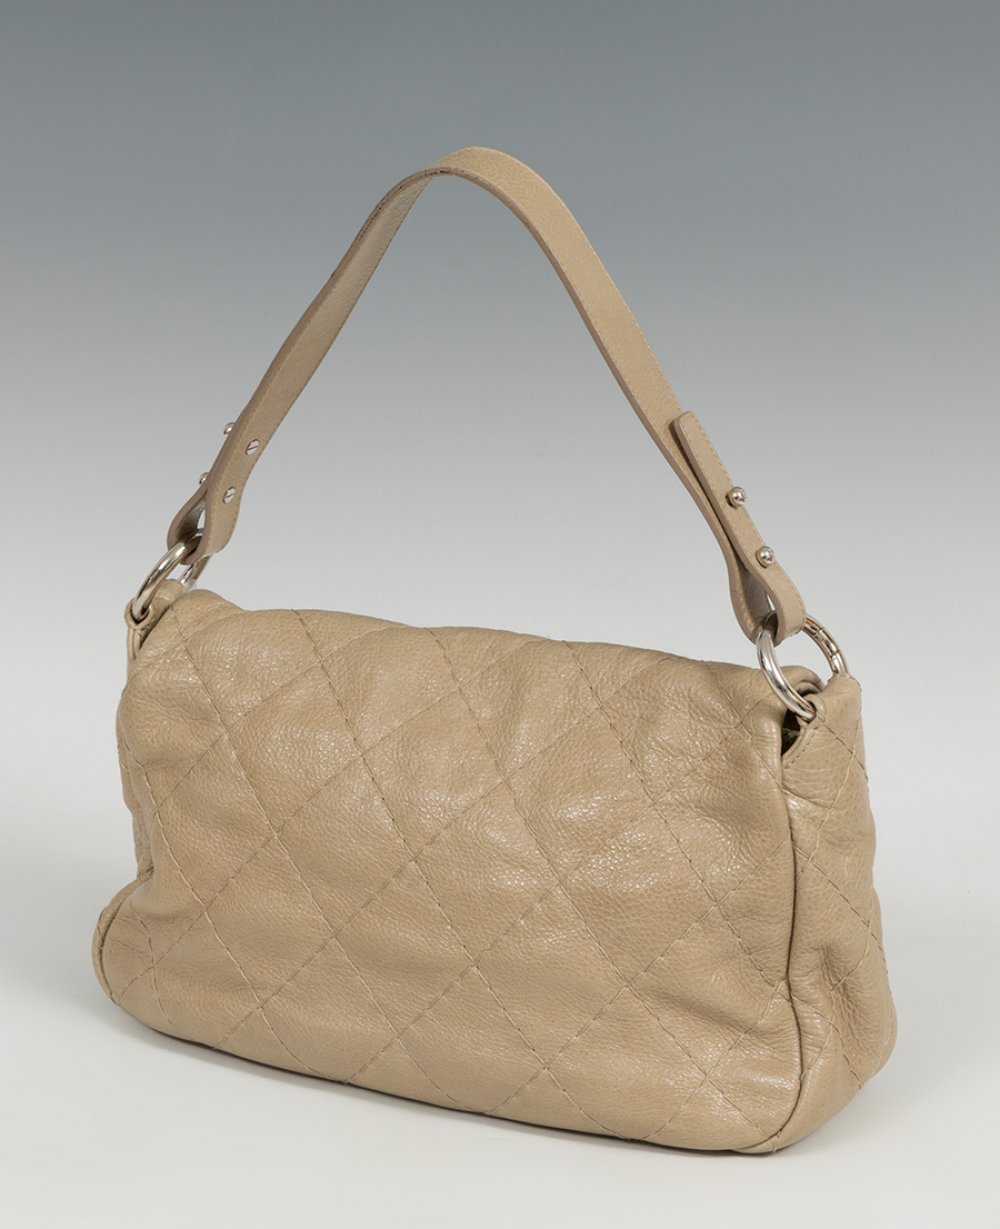 CHANELModel On the road flap bag.Skin. Leather and fabric interior.It has slight signs of use. - Image 4 of 5